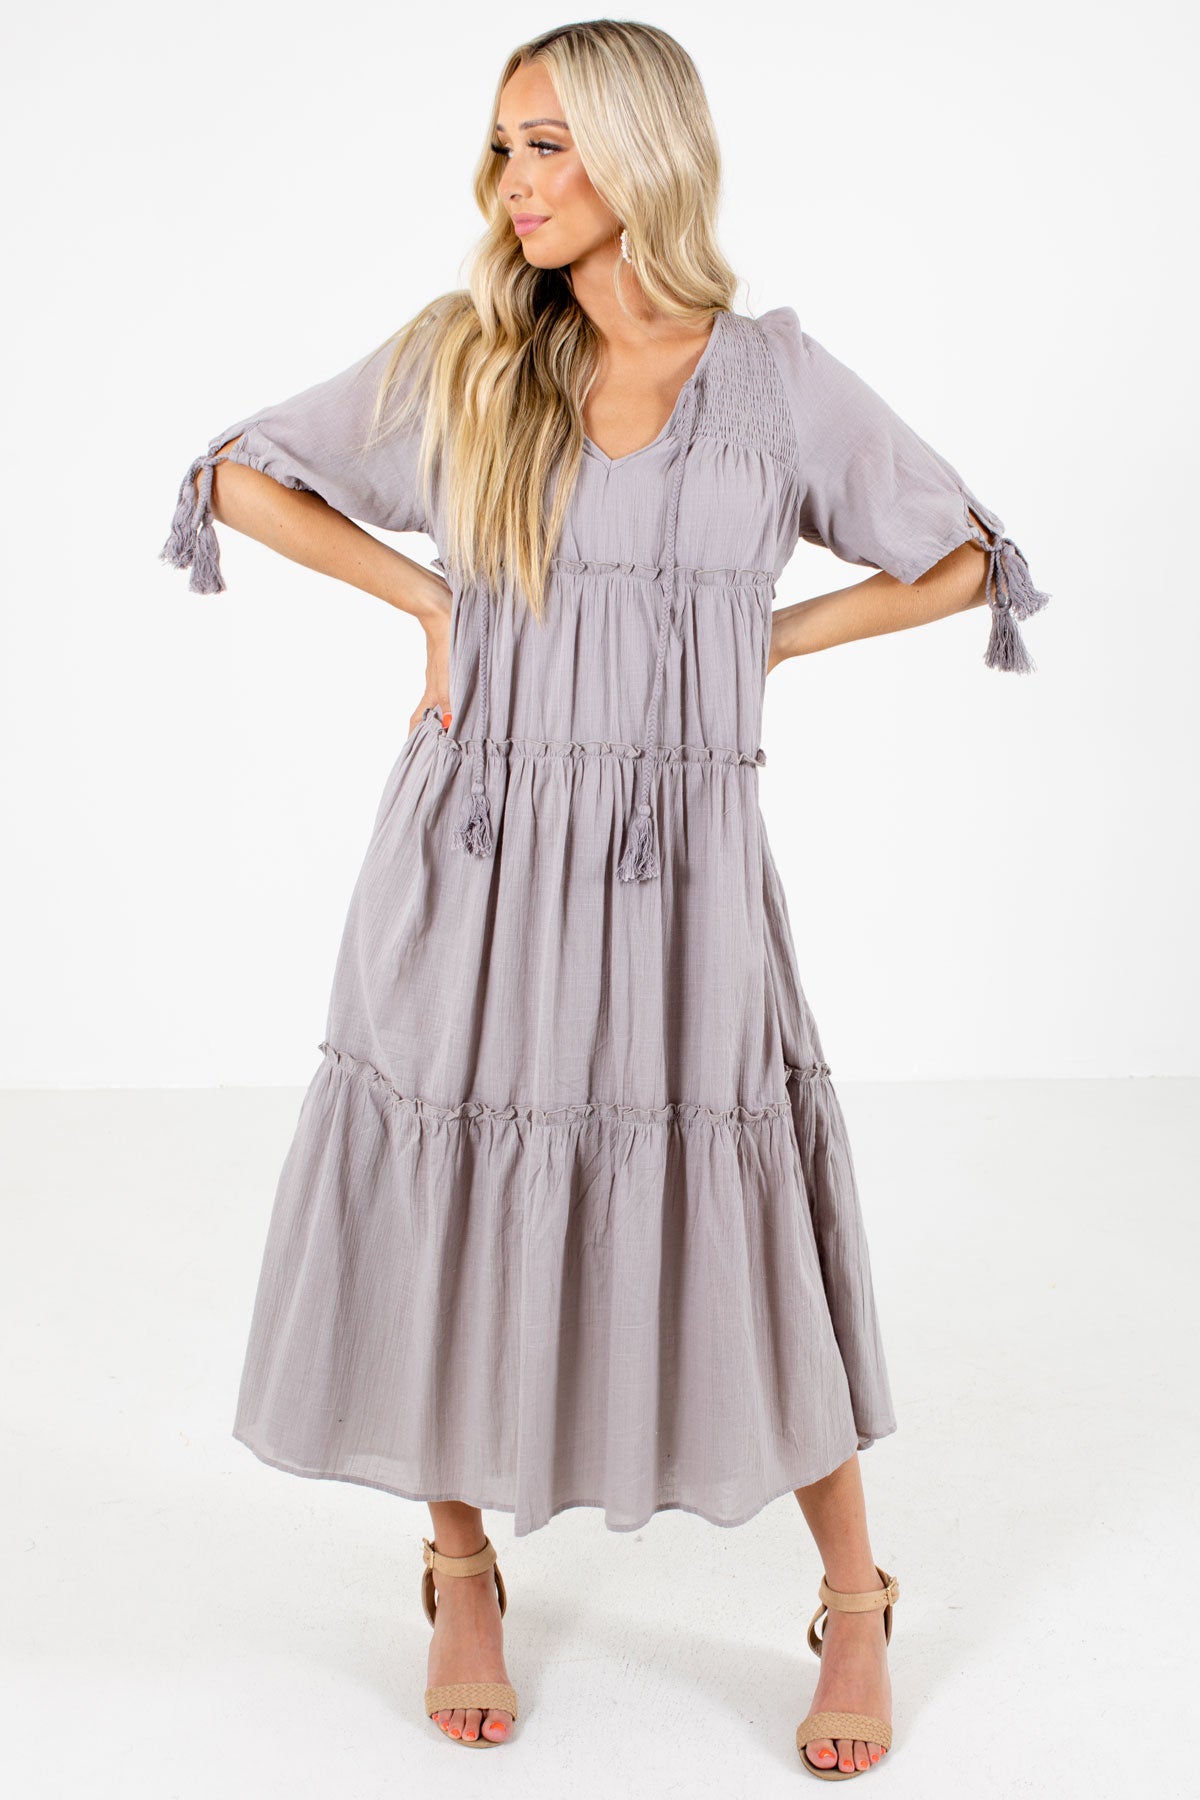 Gray Smocked Accented Boutique Maxi Dresses for Women